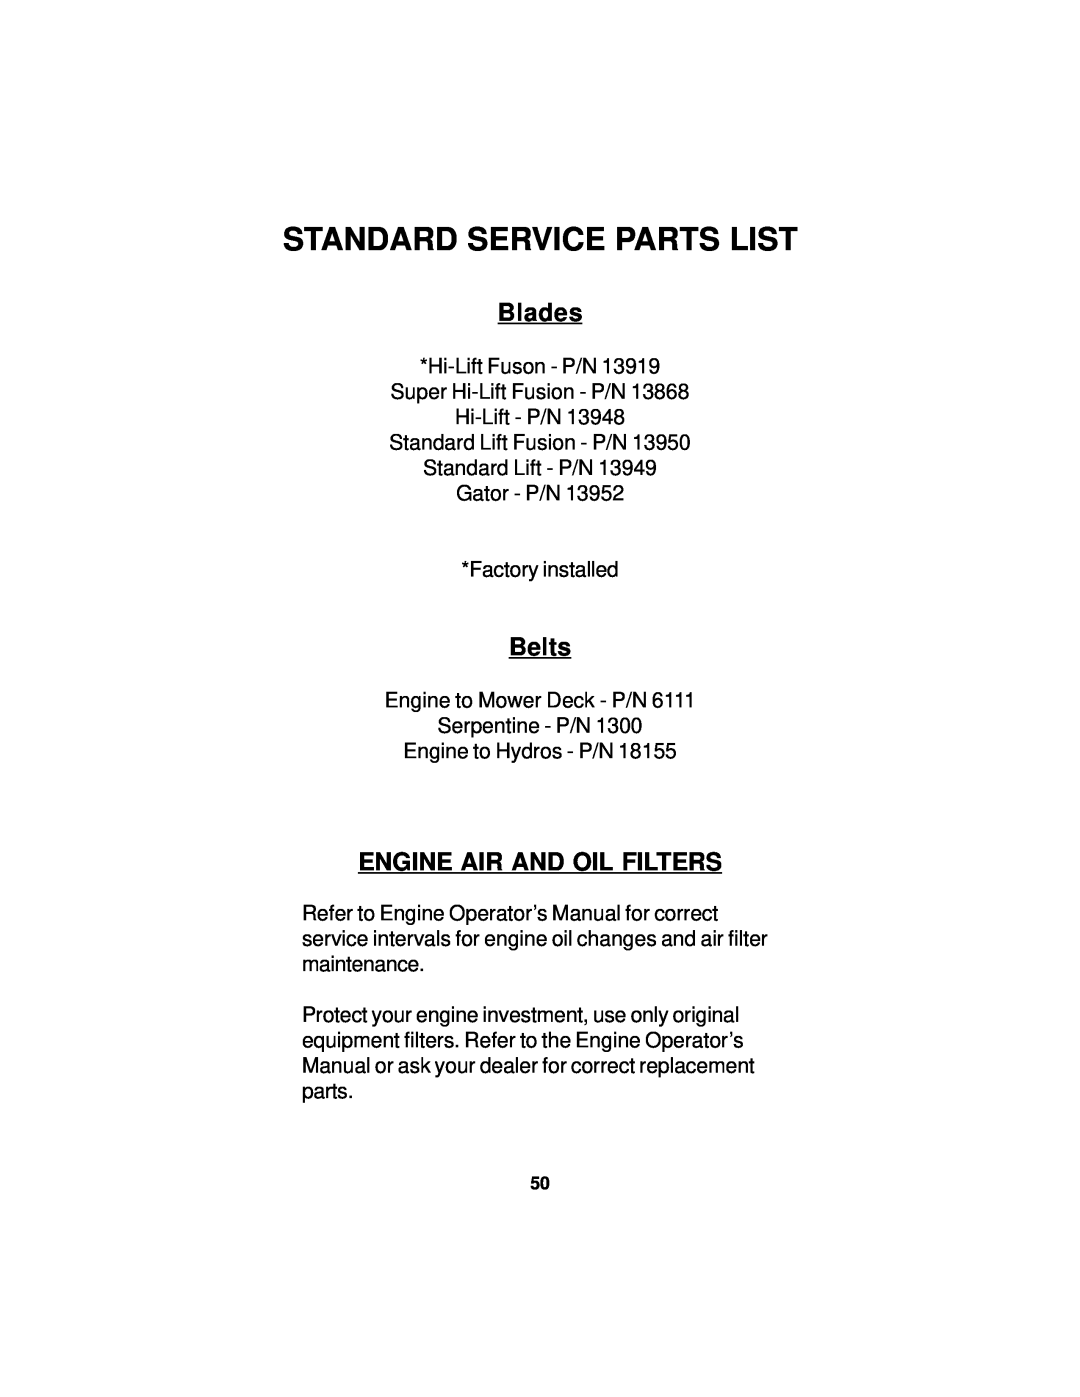 Dixon 18124-0804 manual Standard Service Parts List, Blades, Belts, Engine Air And Oil Filters 